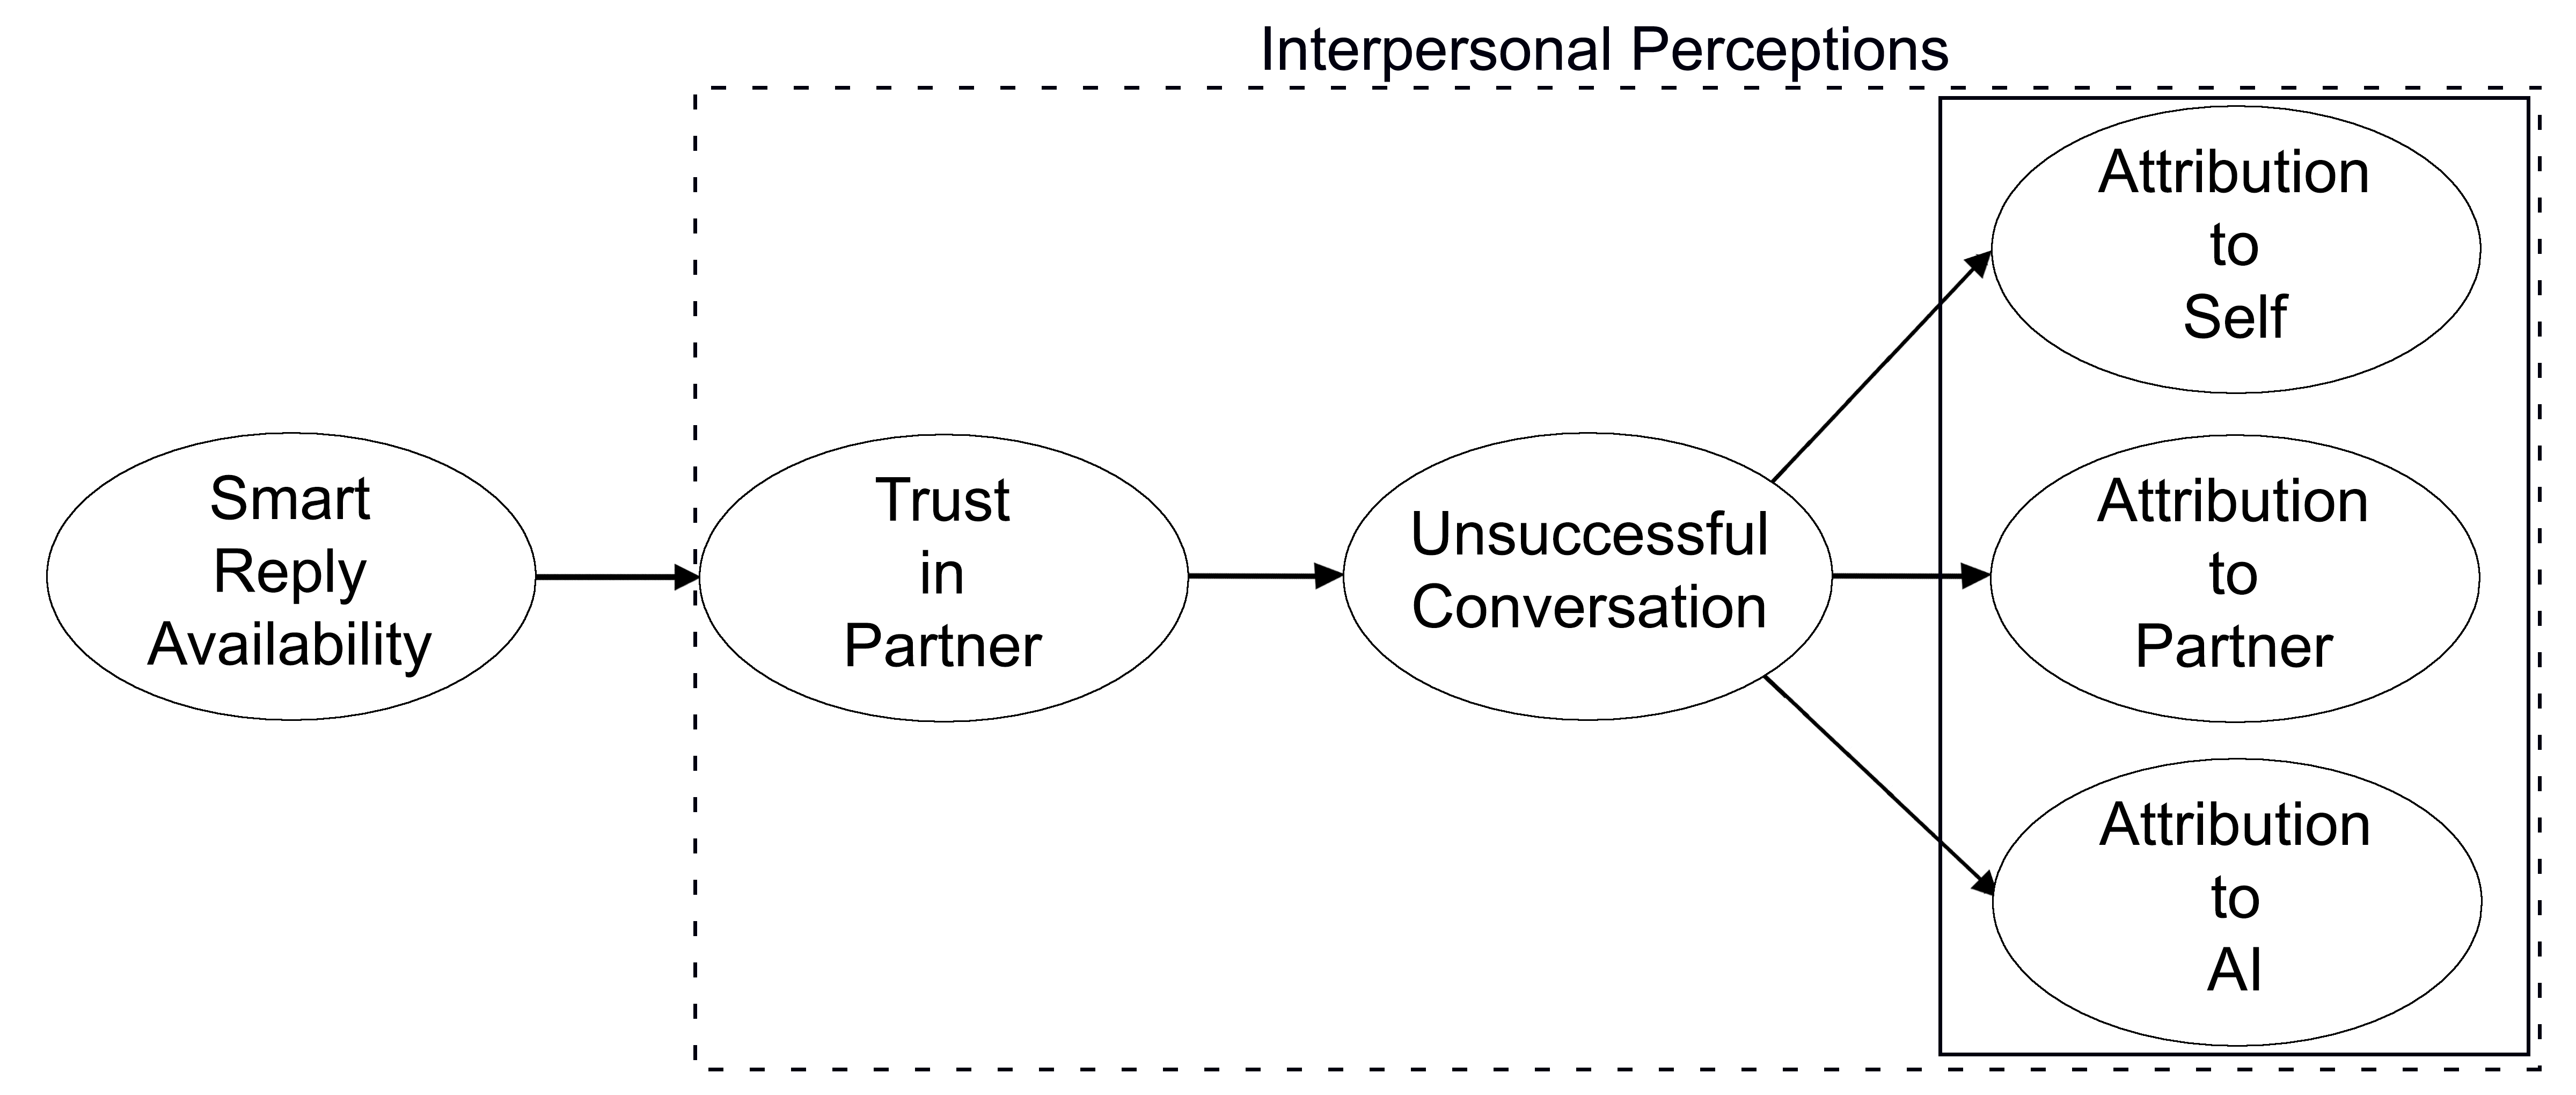 Updated research model based on our findings indicating that
trust is only a mediating factor for attribution when interactions
are unsuccessful.